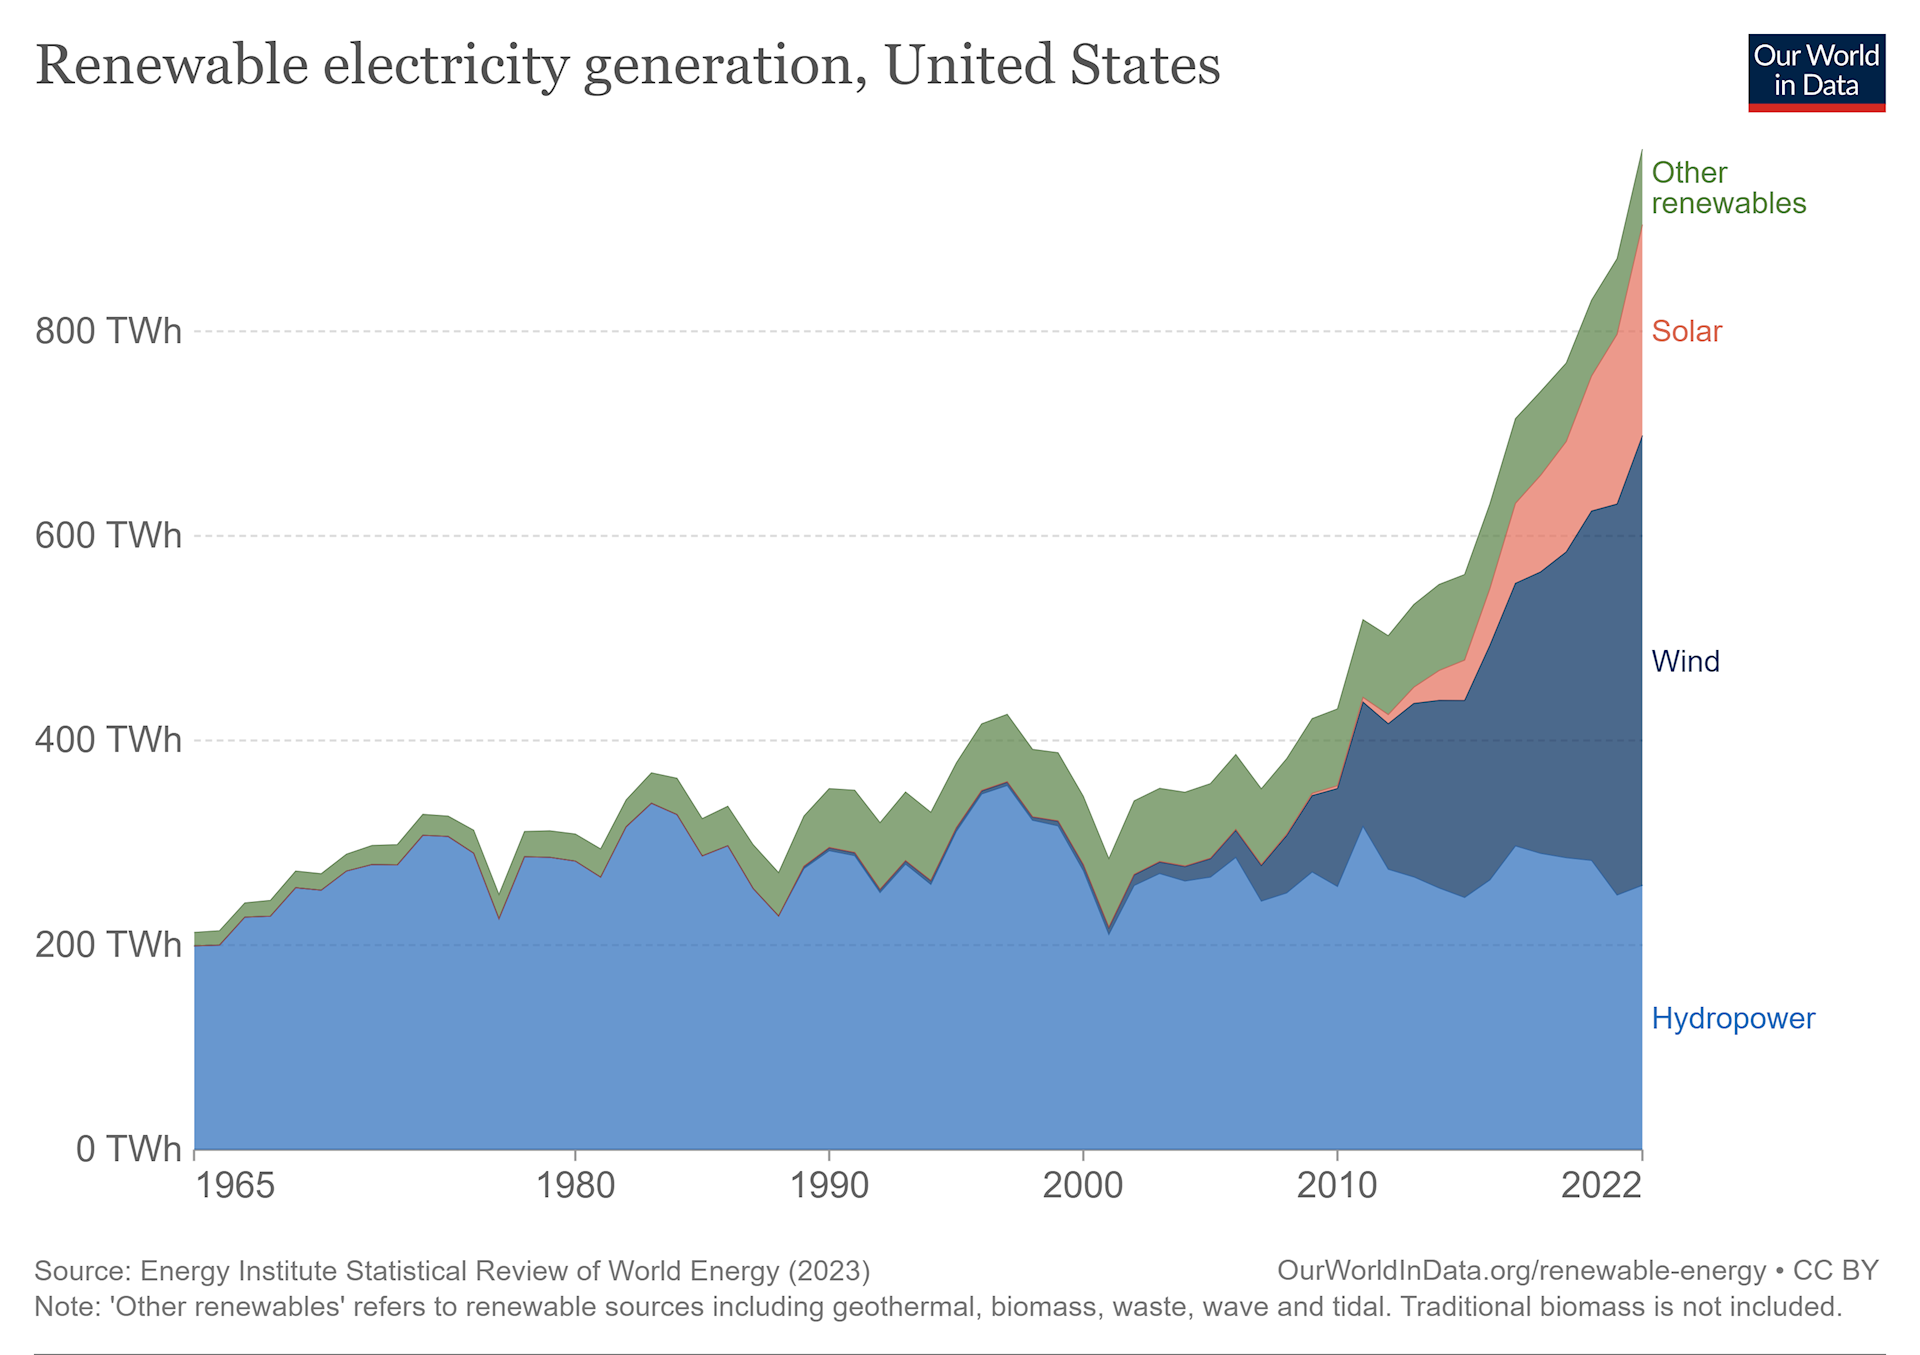 graph that shows total renerwable energy generation in the U.S. from 1965 to 2022 in terawatt hours, increasing from about 200 to about 1,000